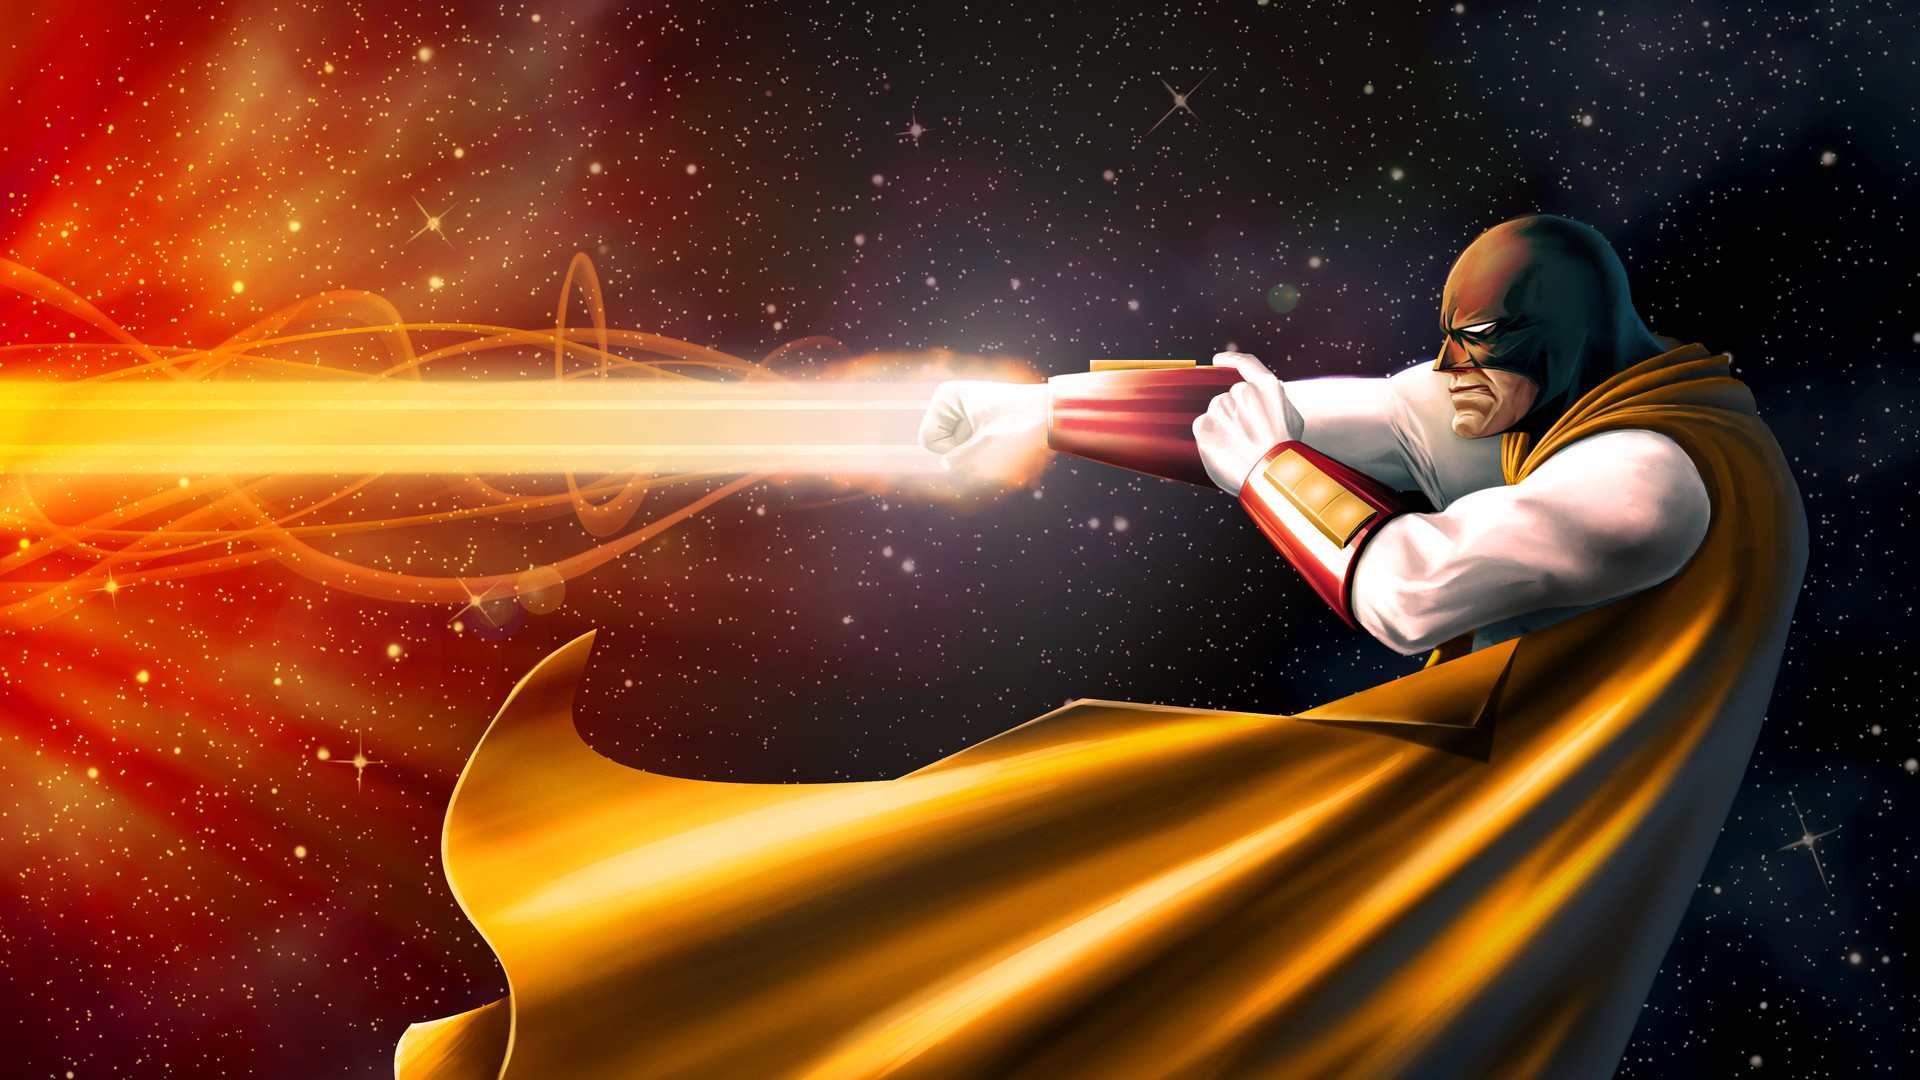 Space ghost wallpapers 26304 9264938